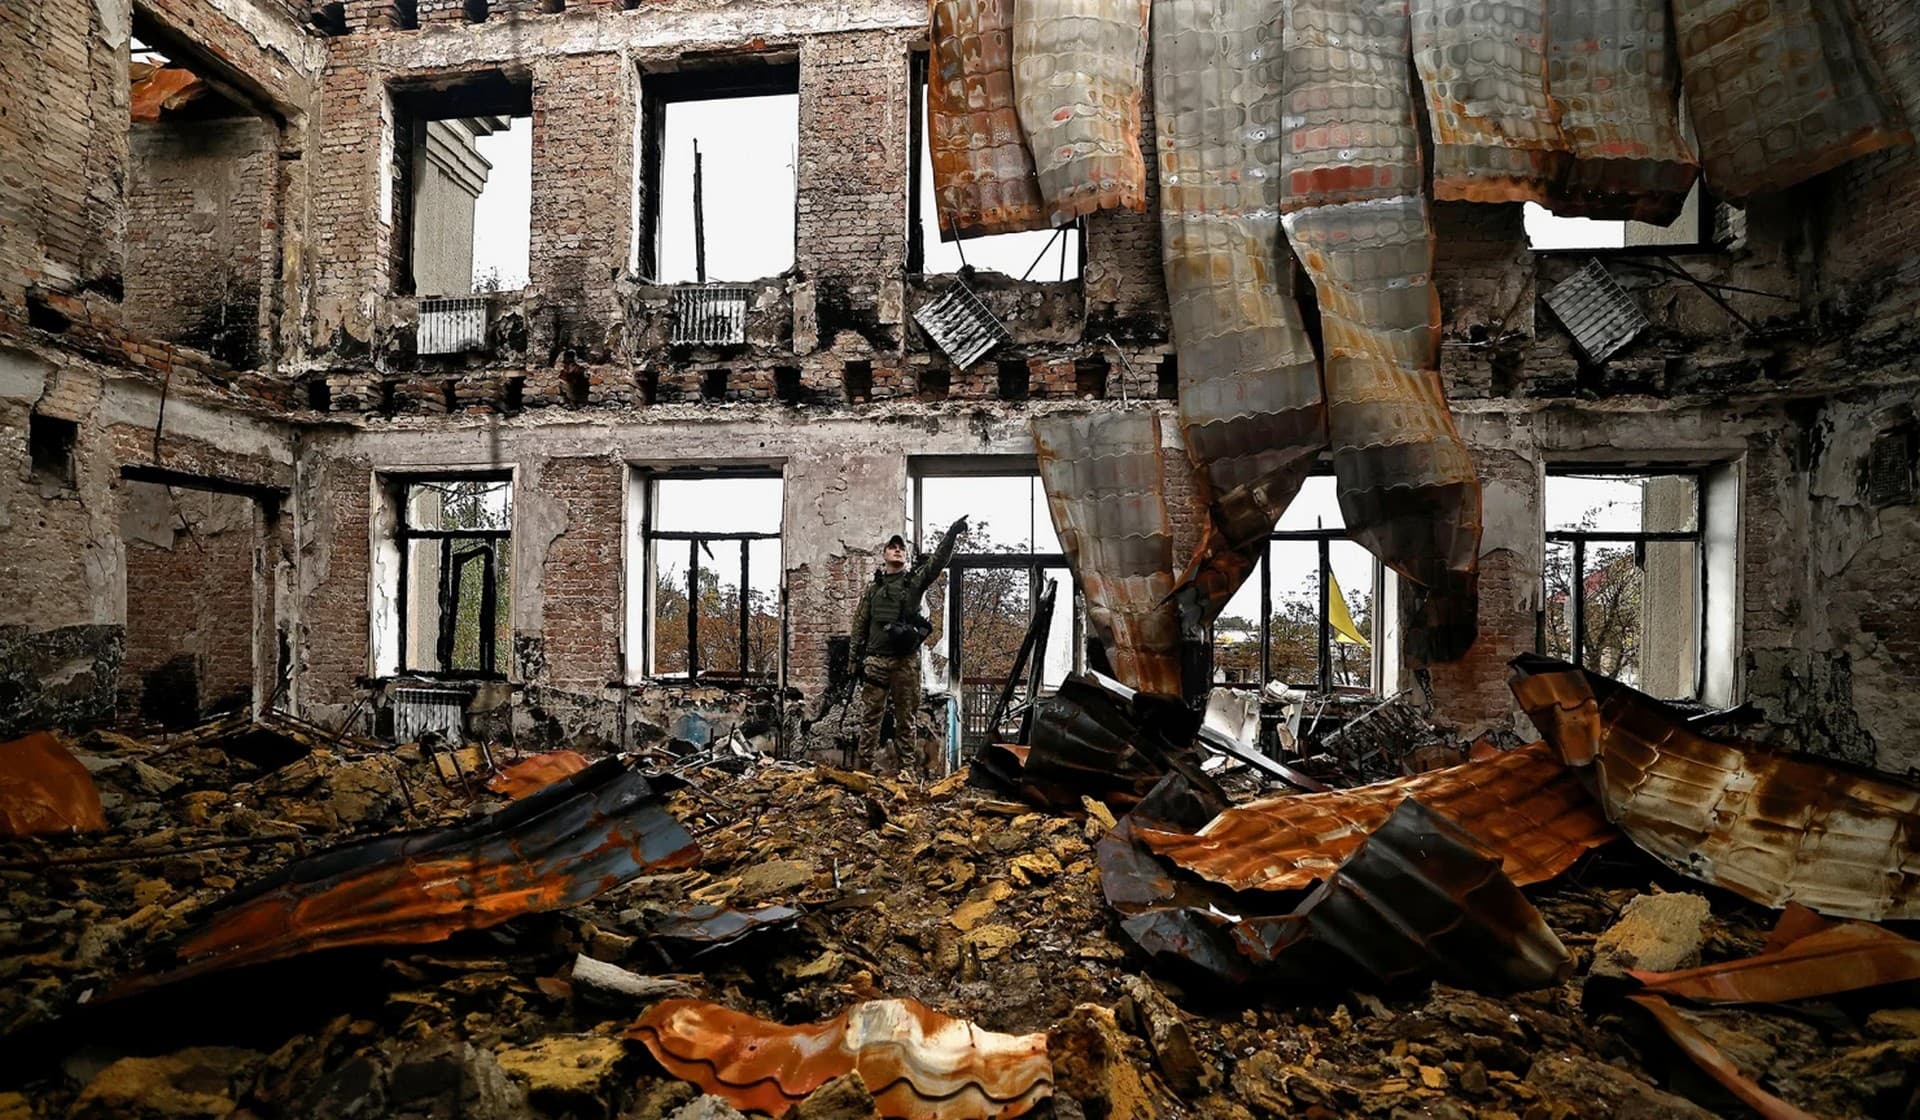 a Ukranian army officer gestures as he stands among the remains of a school in the recently liberated town of Lyman